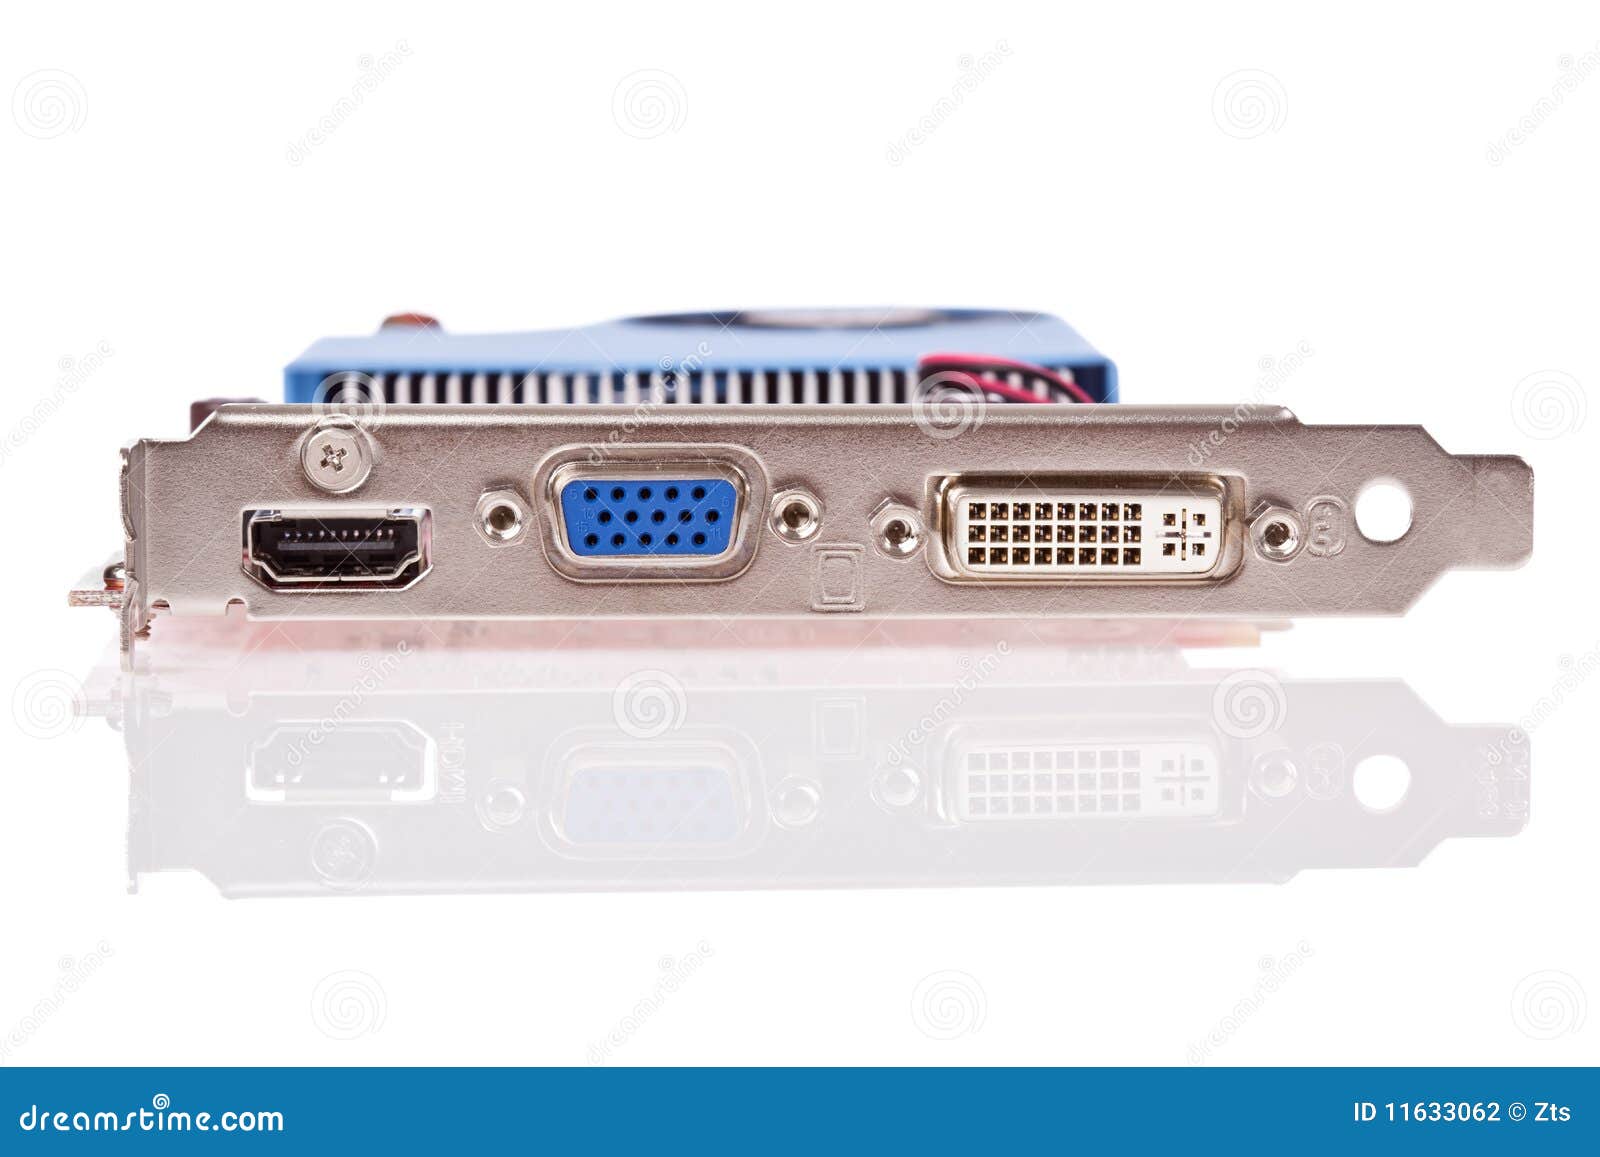 video card with hdmi, vga and dvi connectors